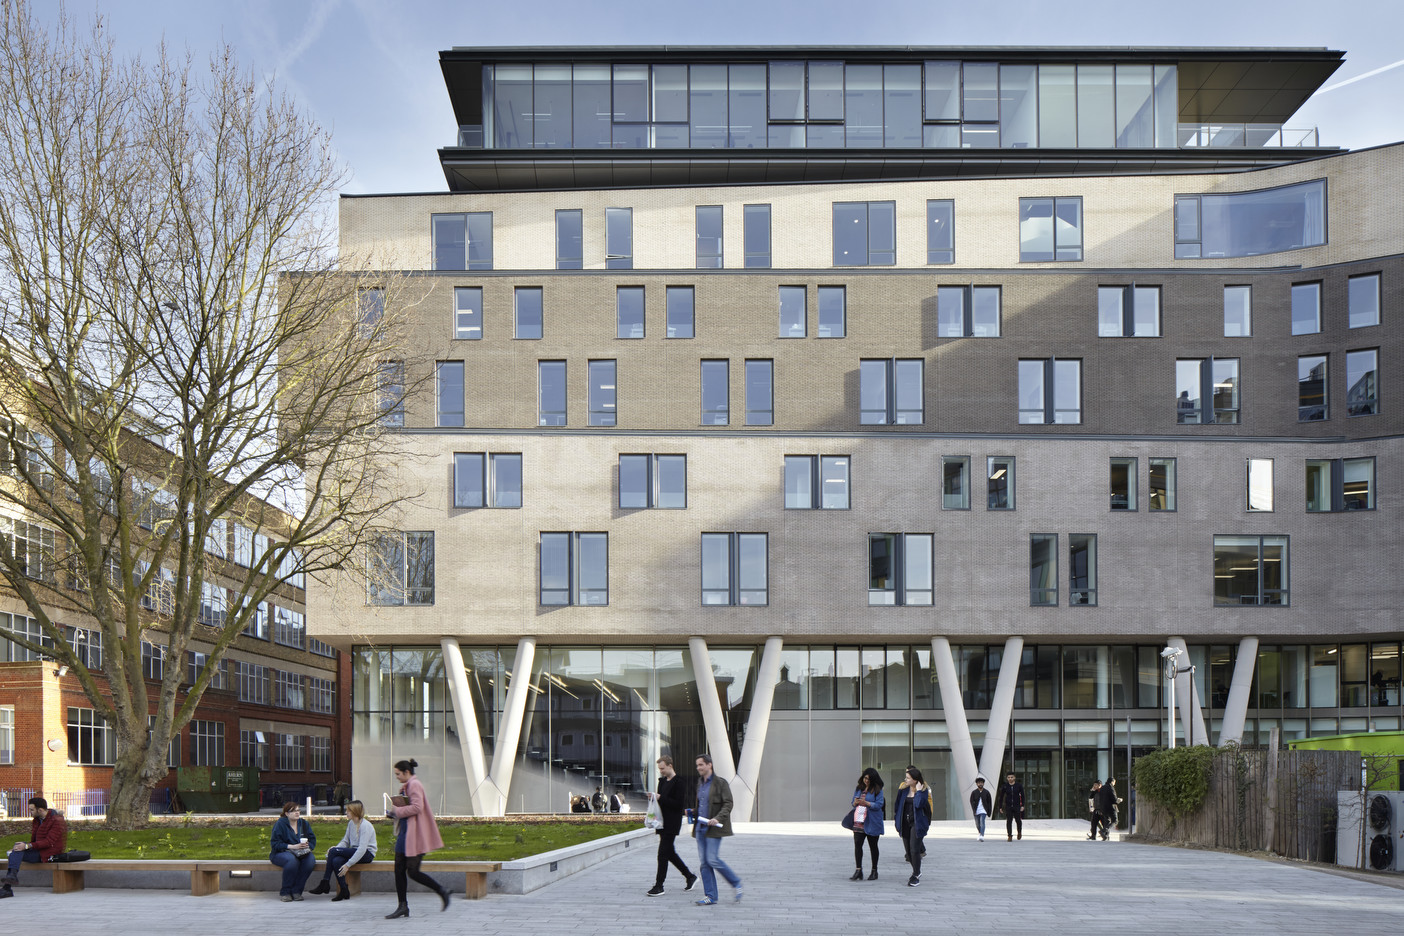 The Graduate Centre at Queen Mary University of London